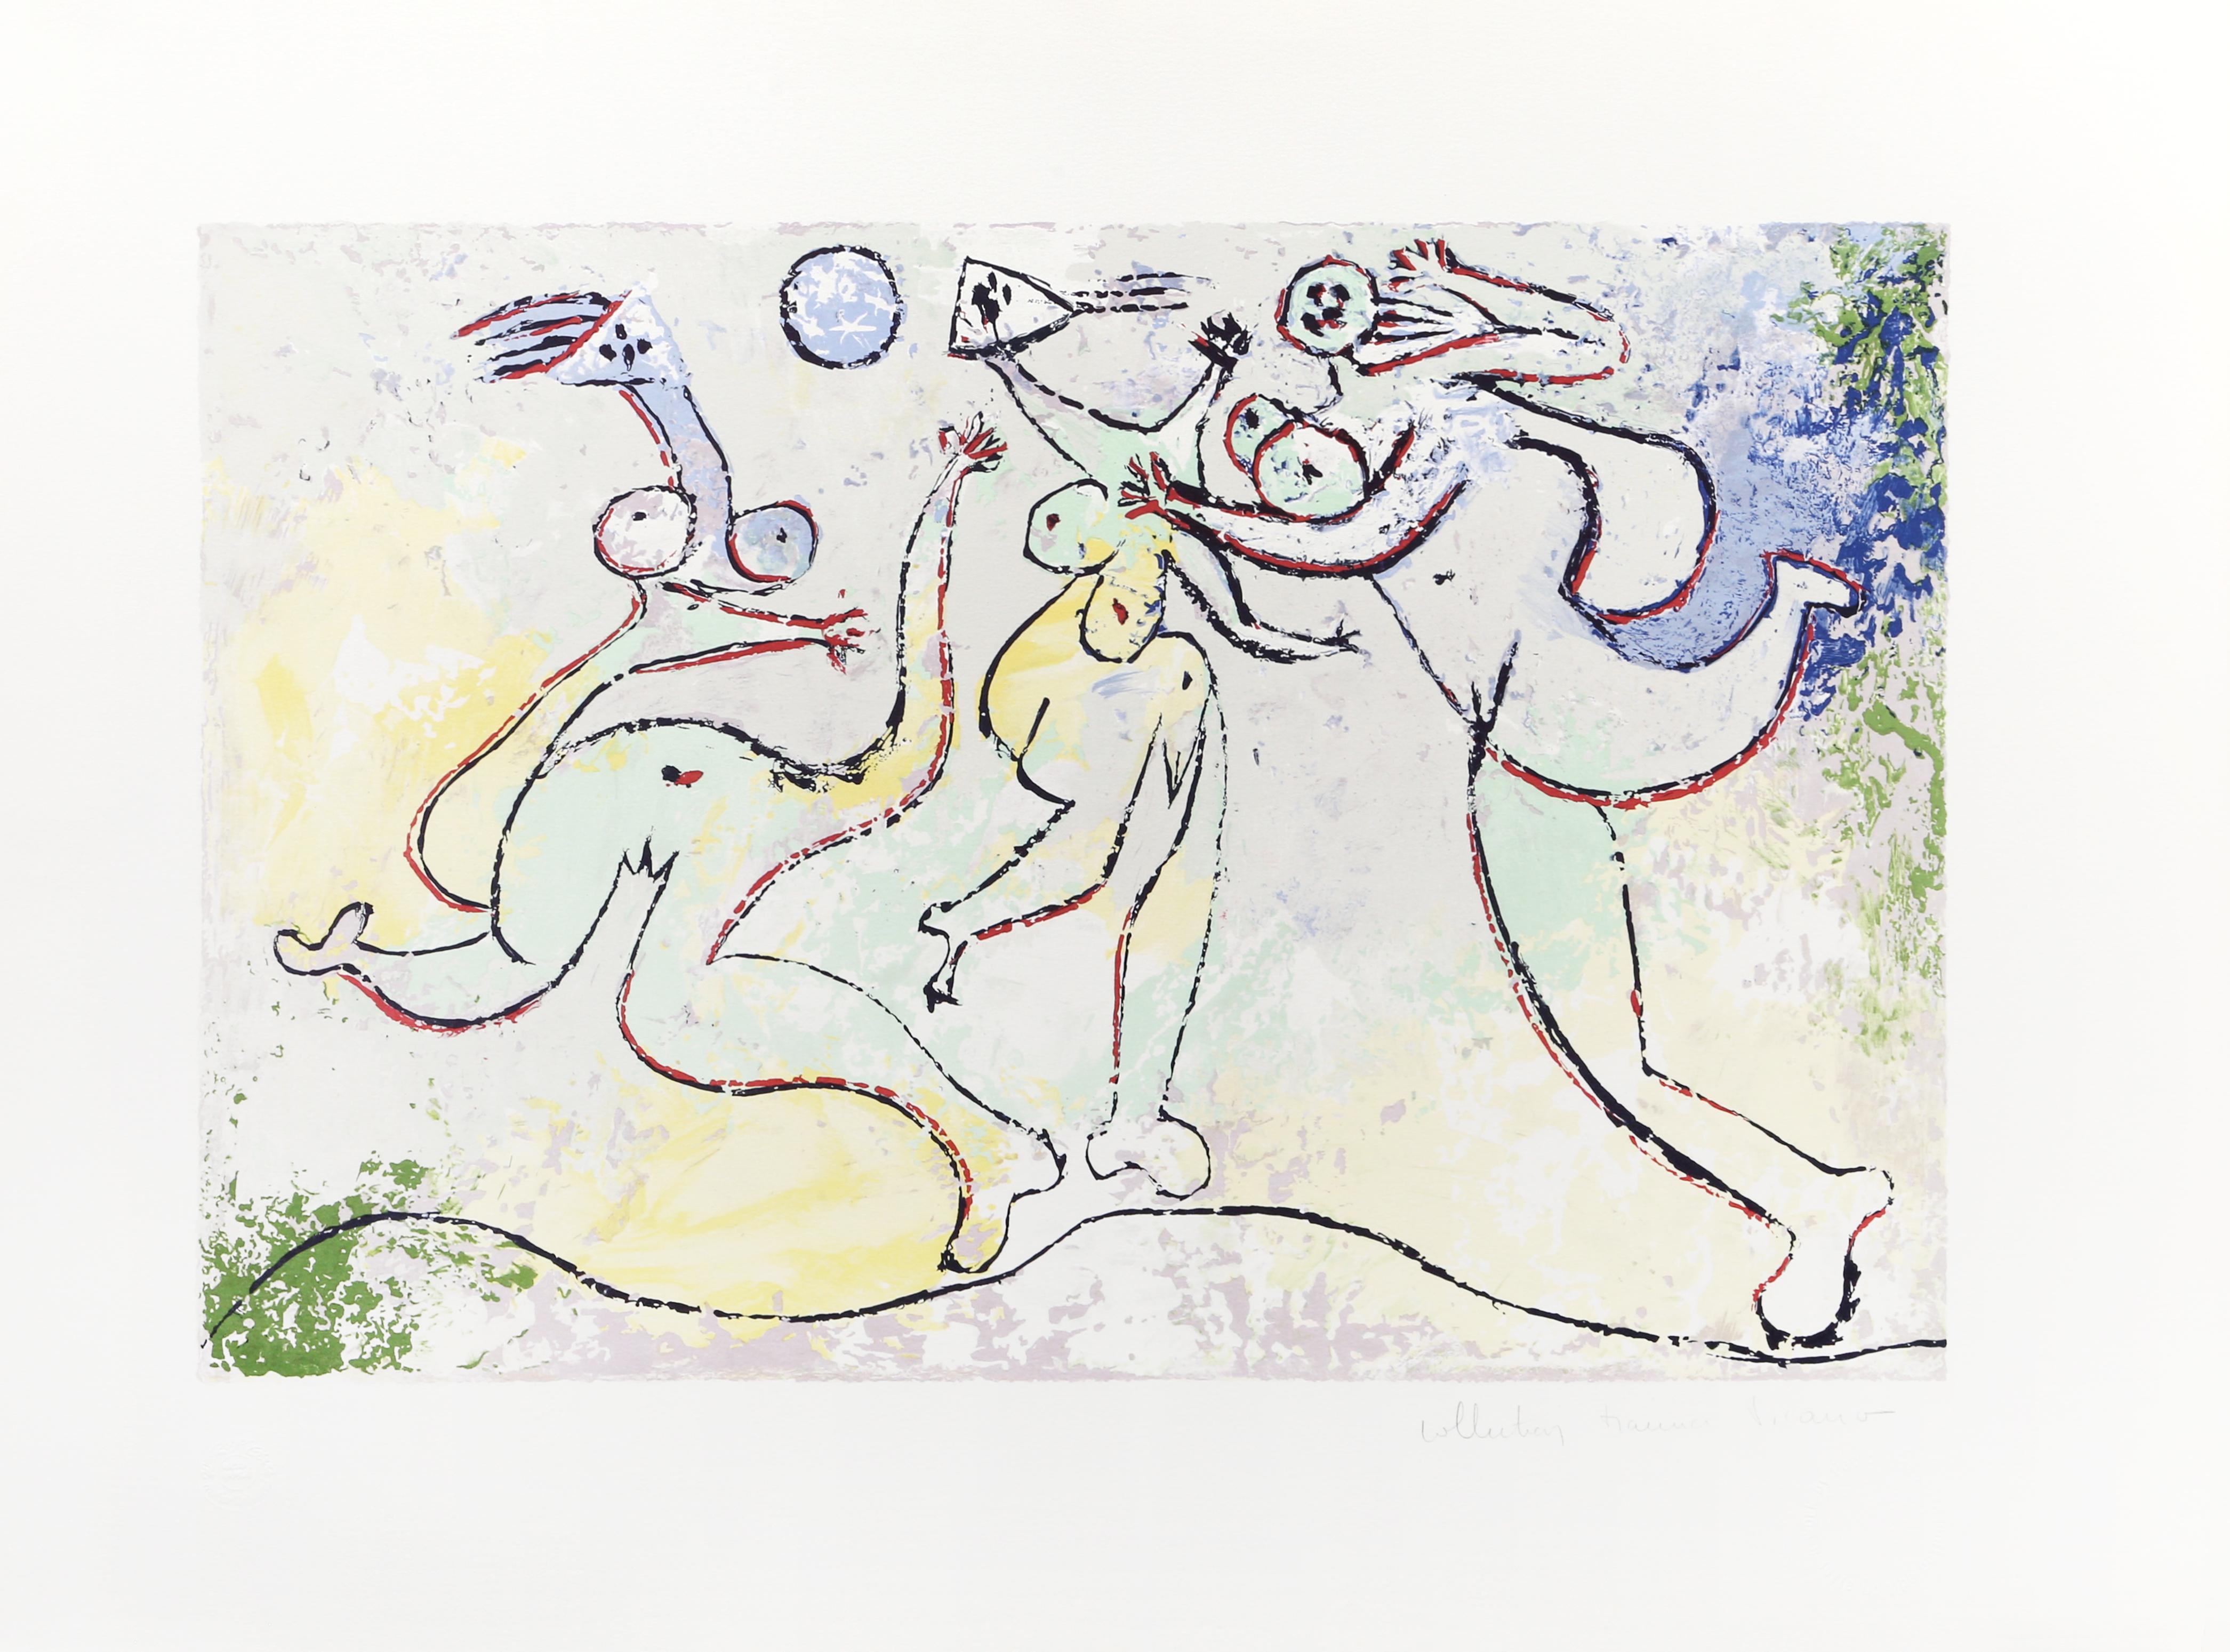 In this spirited beach scene, Pablo Picasso depicts three nude female figures playing with a ball. Full of movement and bursting with color, this print showcases the artist's ability to create a dynamic composition of fluid motion. A lithograph from